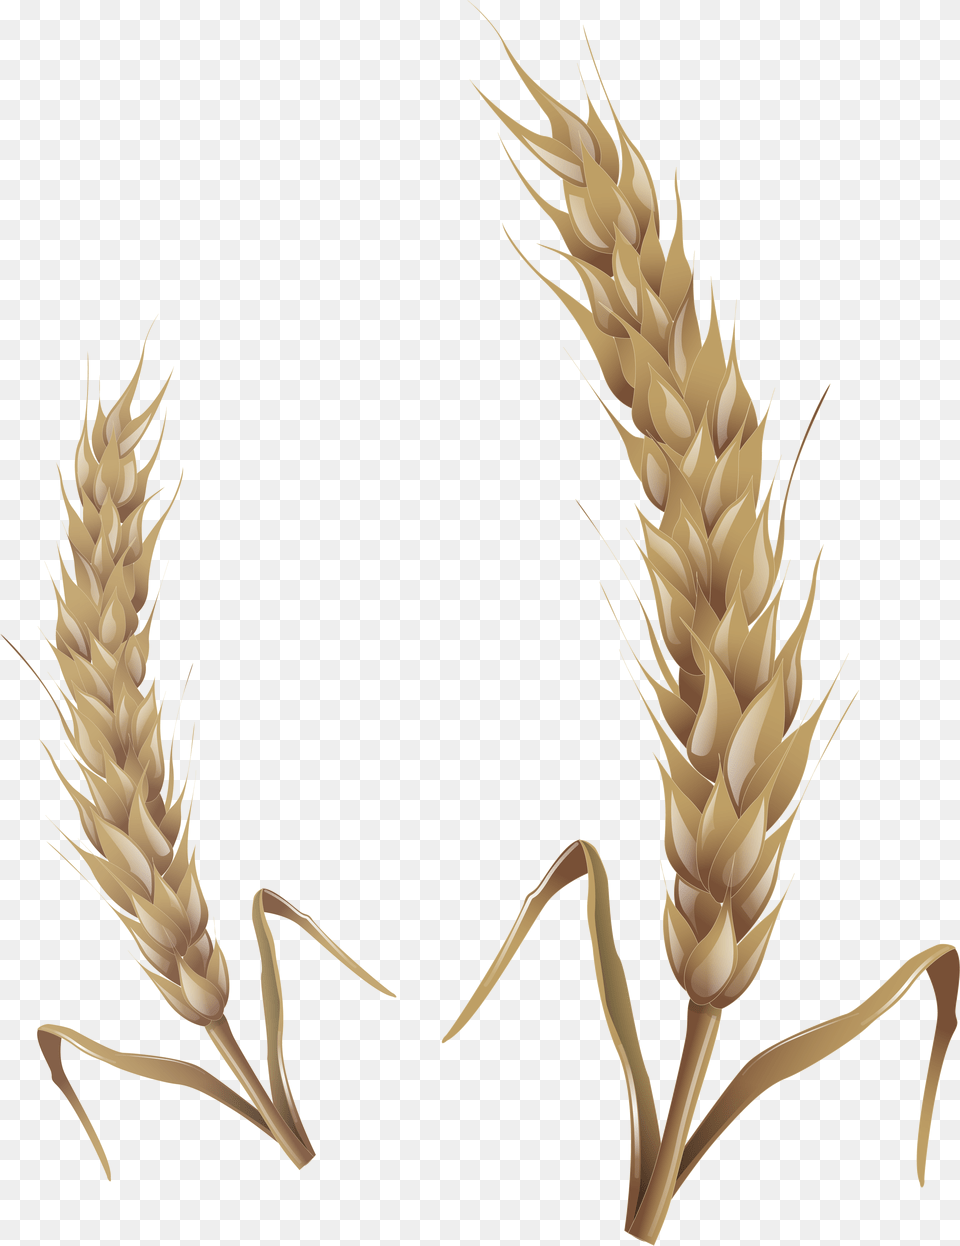 Wheat For Download Wheat Stalk, Food, Grain, Produce, Chandelier Png Image